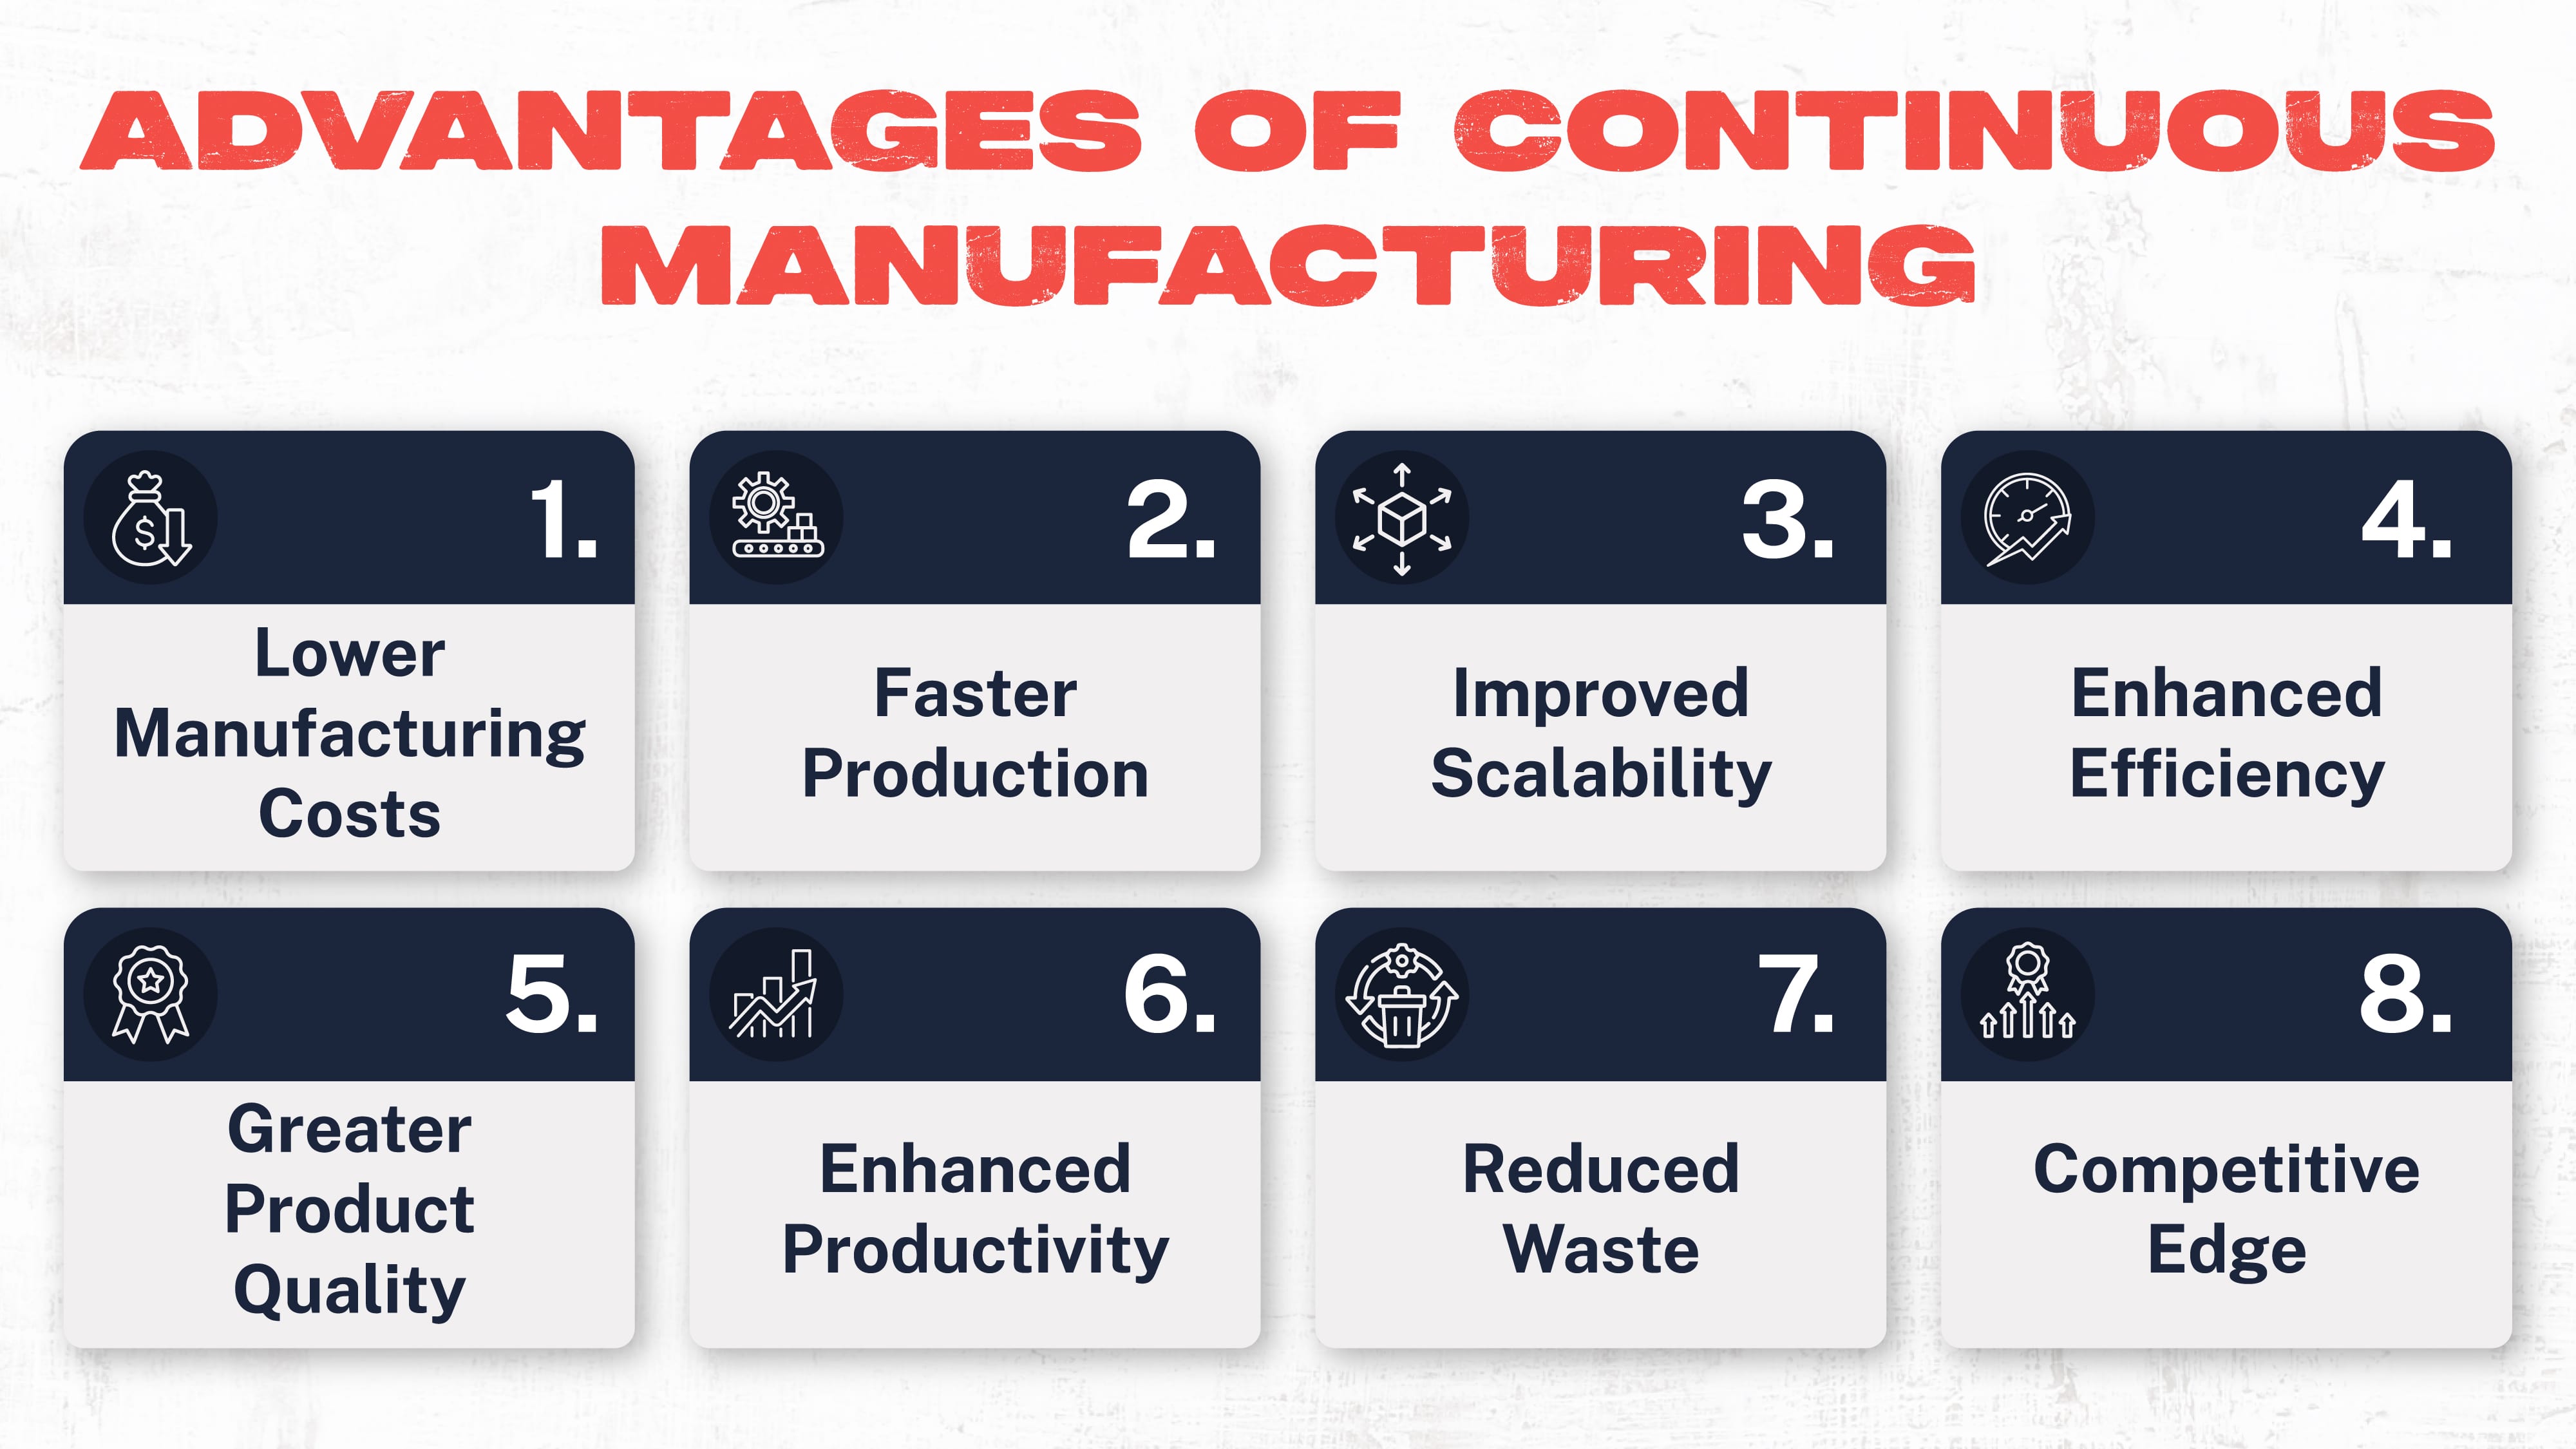 Advantages of Continuous Manufacturing